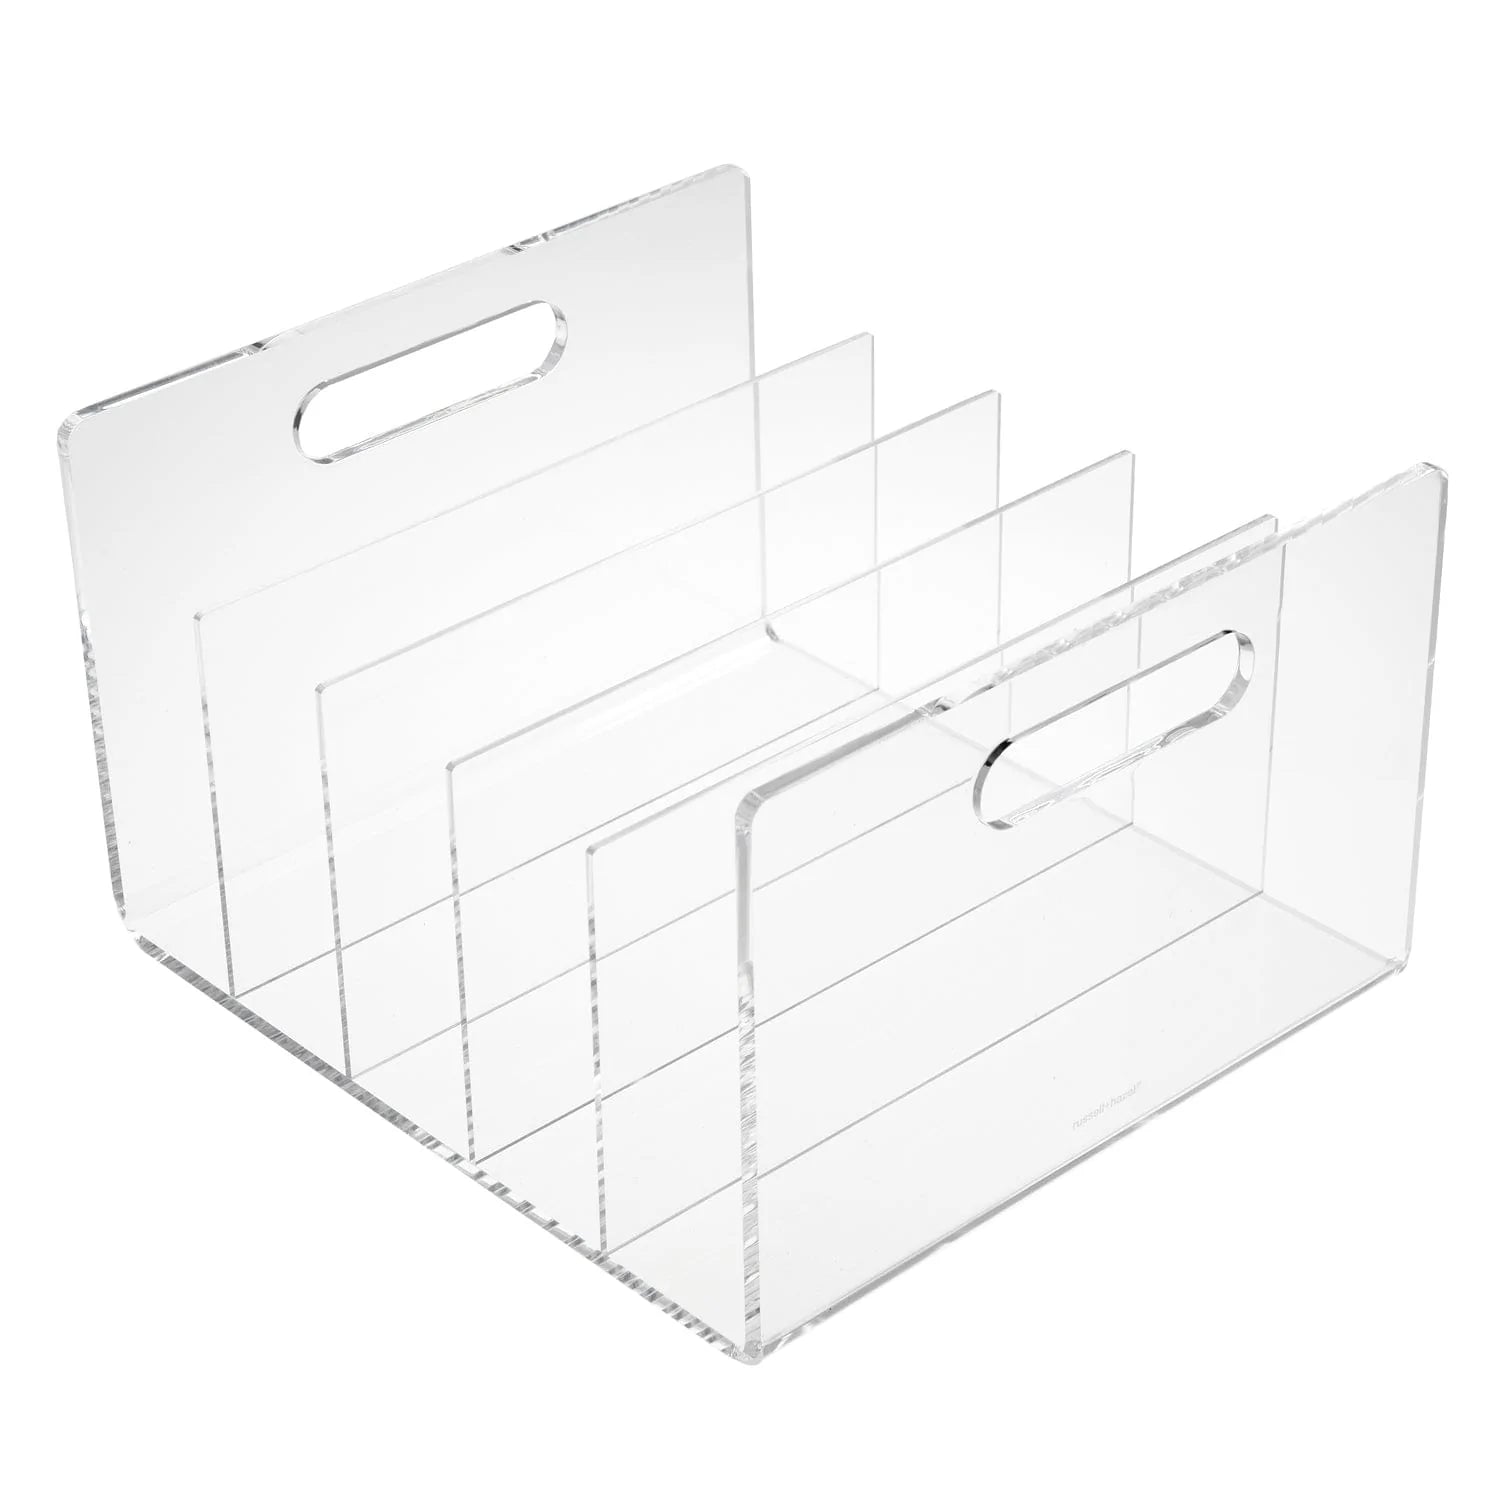 5 Pieces Documents Storage Box Books Holder Tabletop Stationery